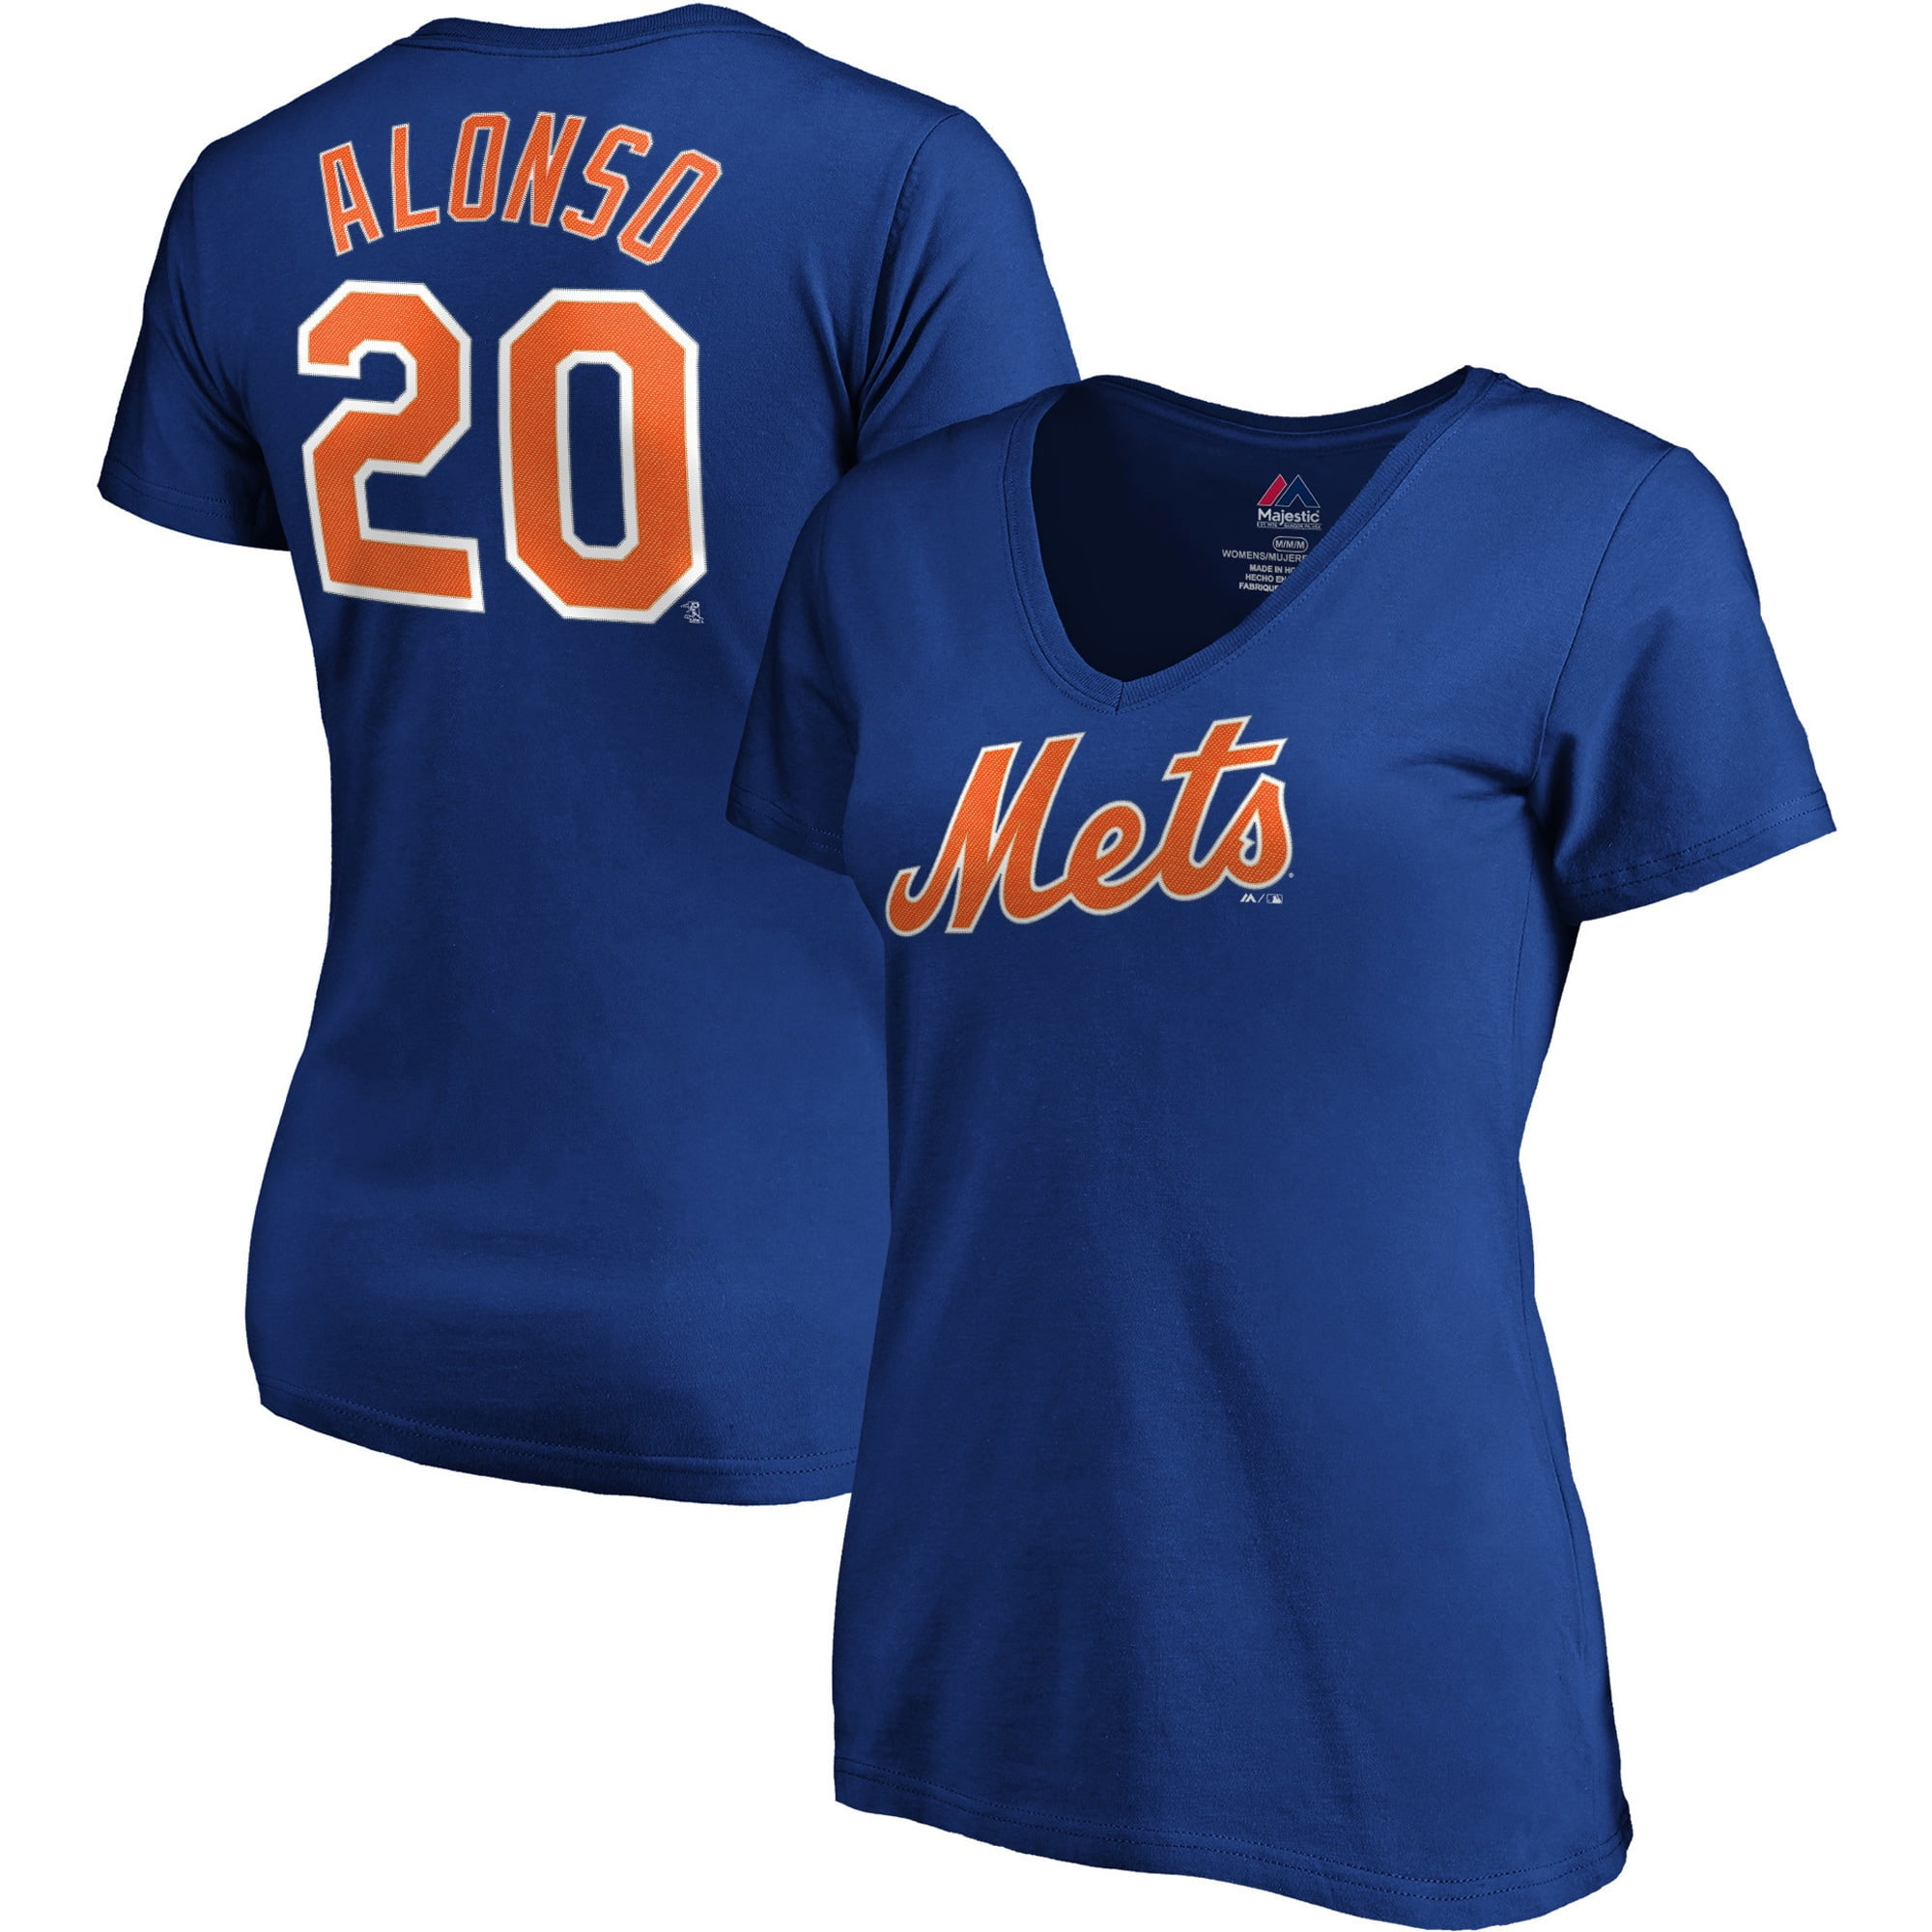 mets made for october t shirt